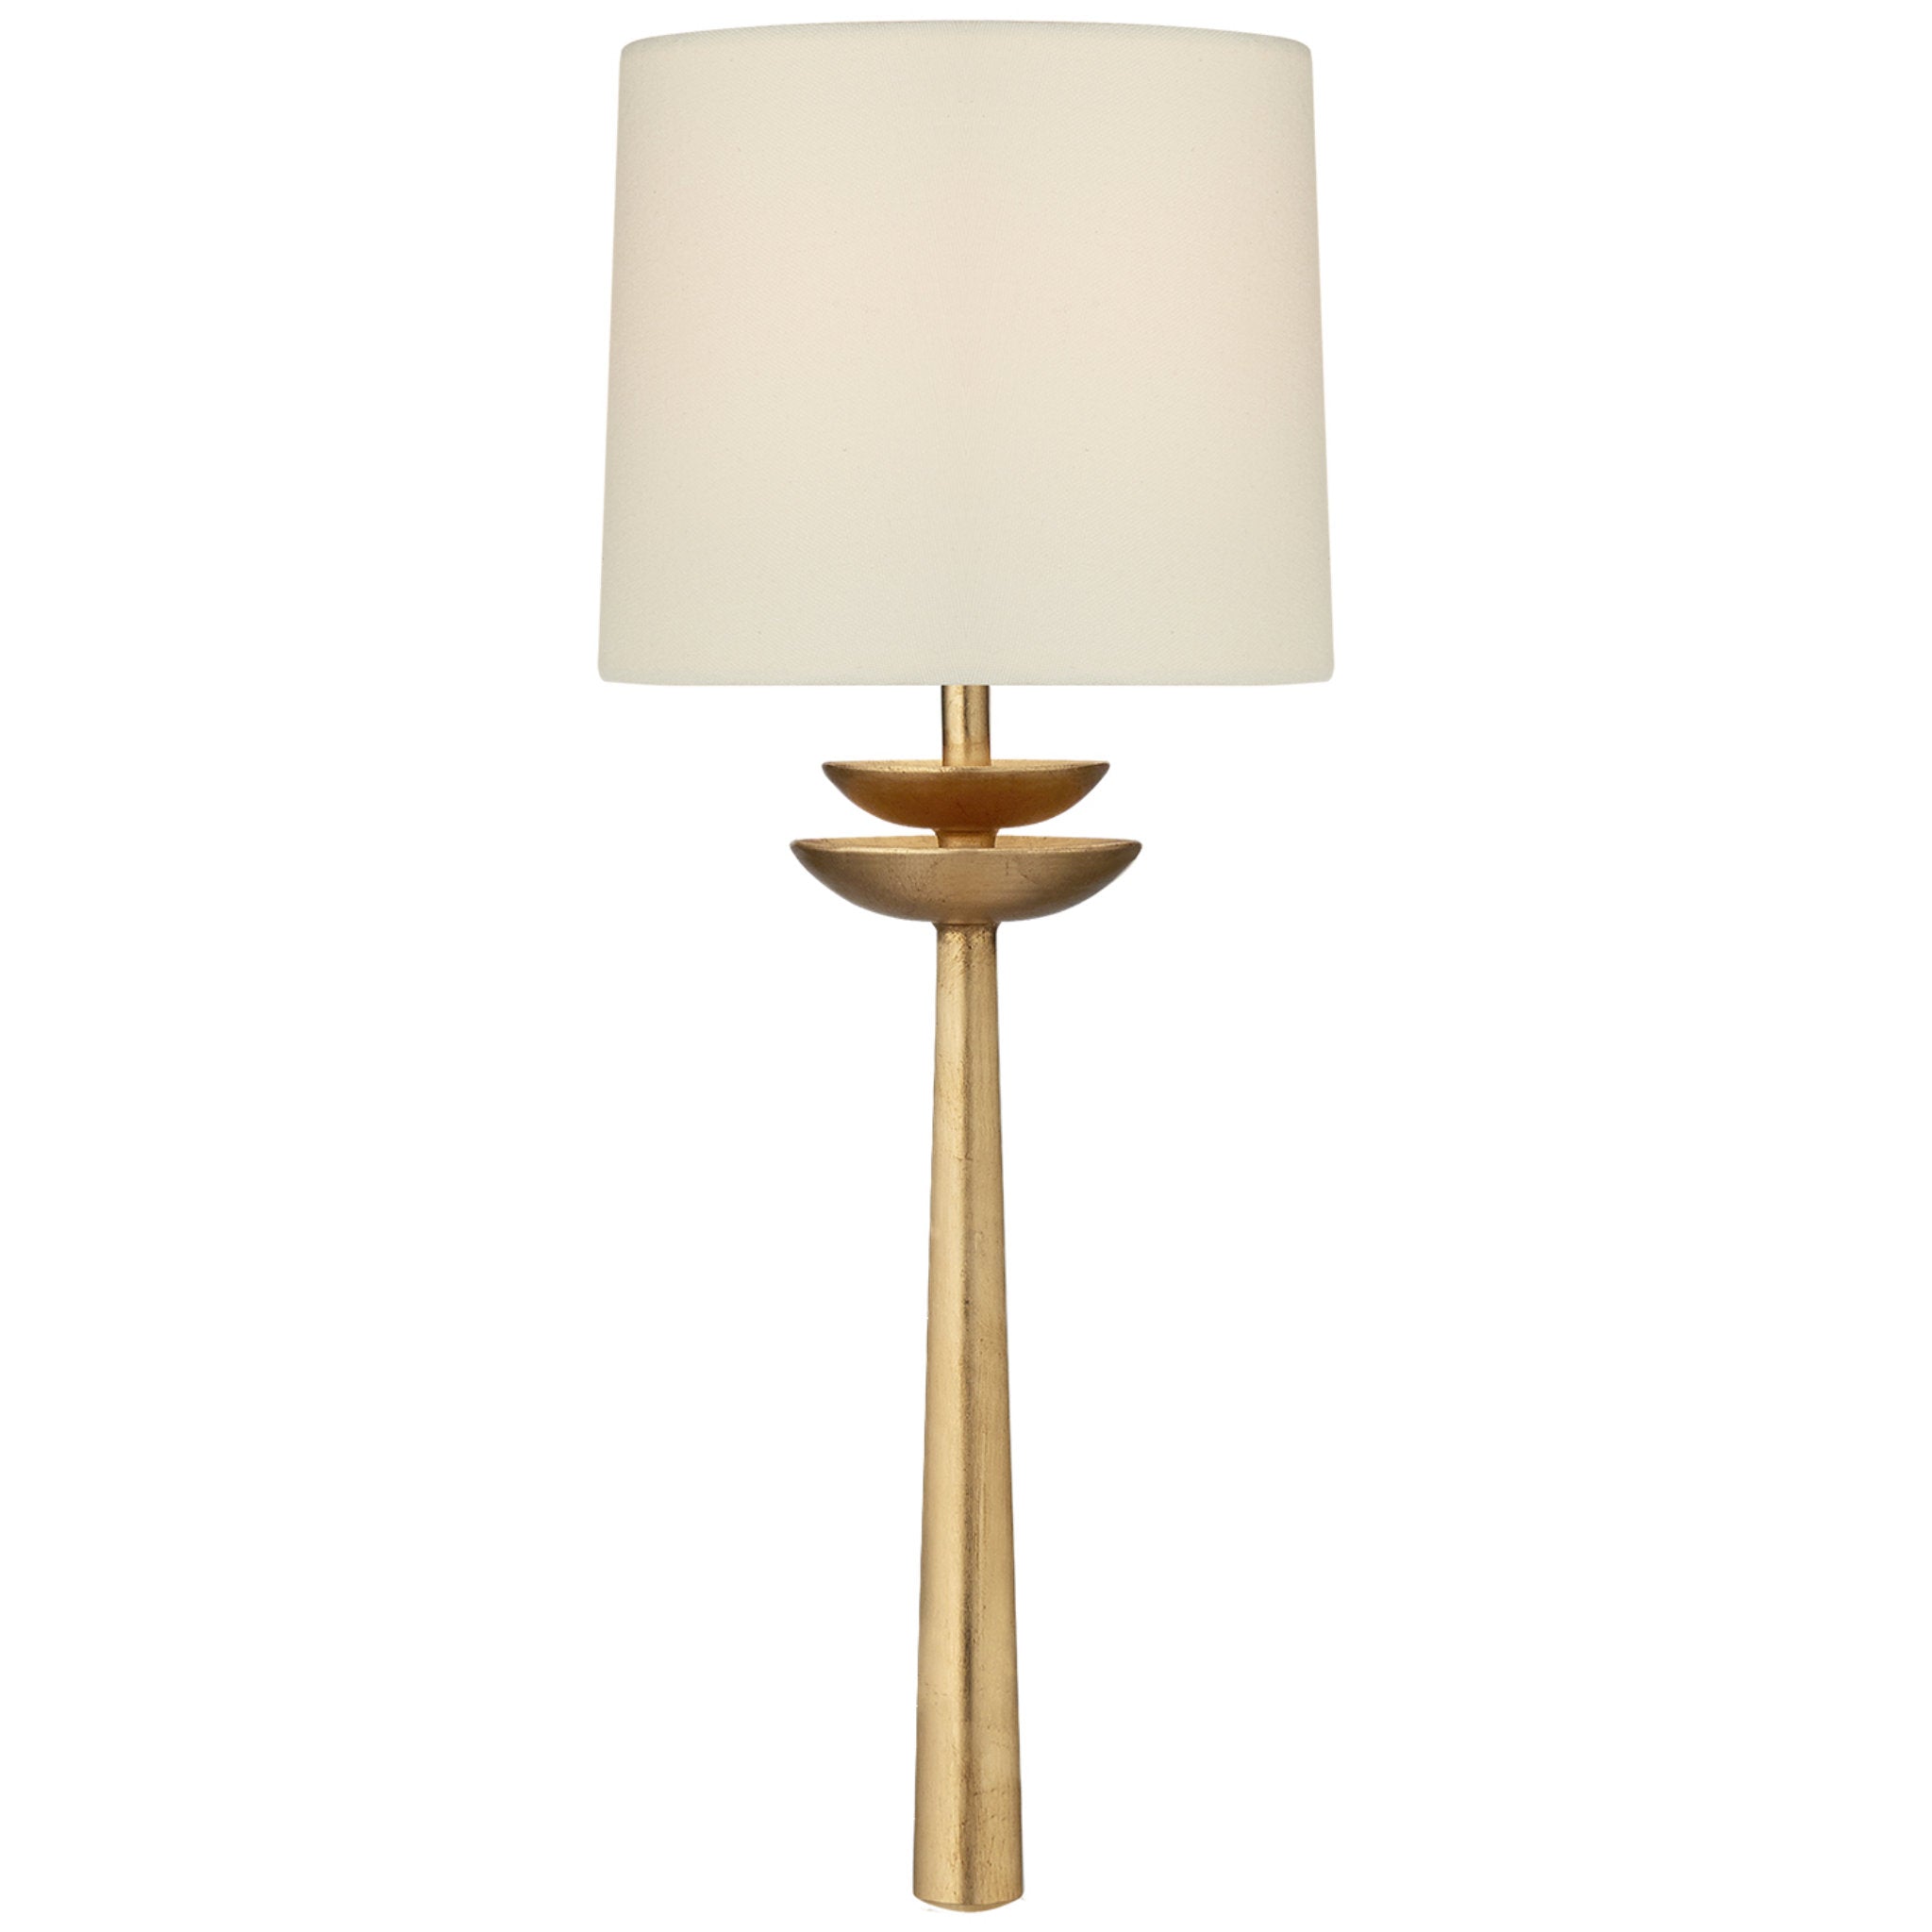 AERIN Beaumont Medium Tail Sconce in Gild with Linen Shade